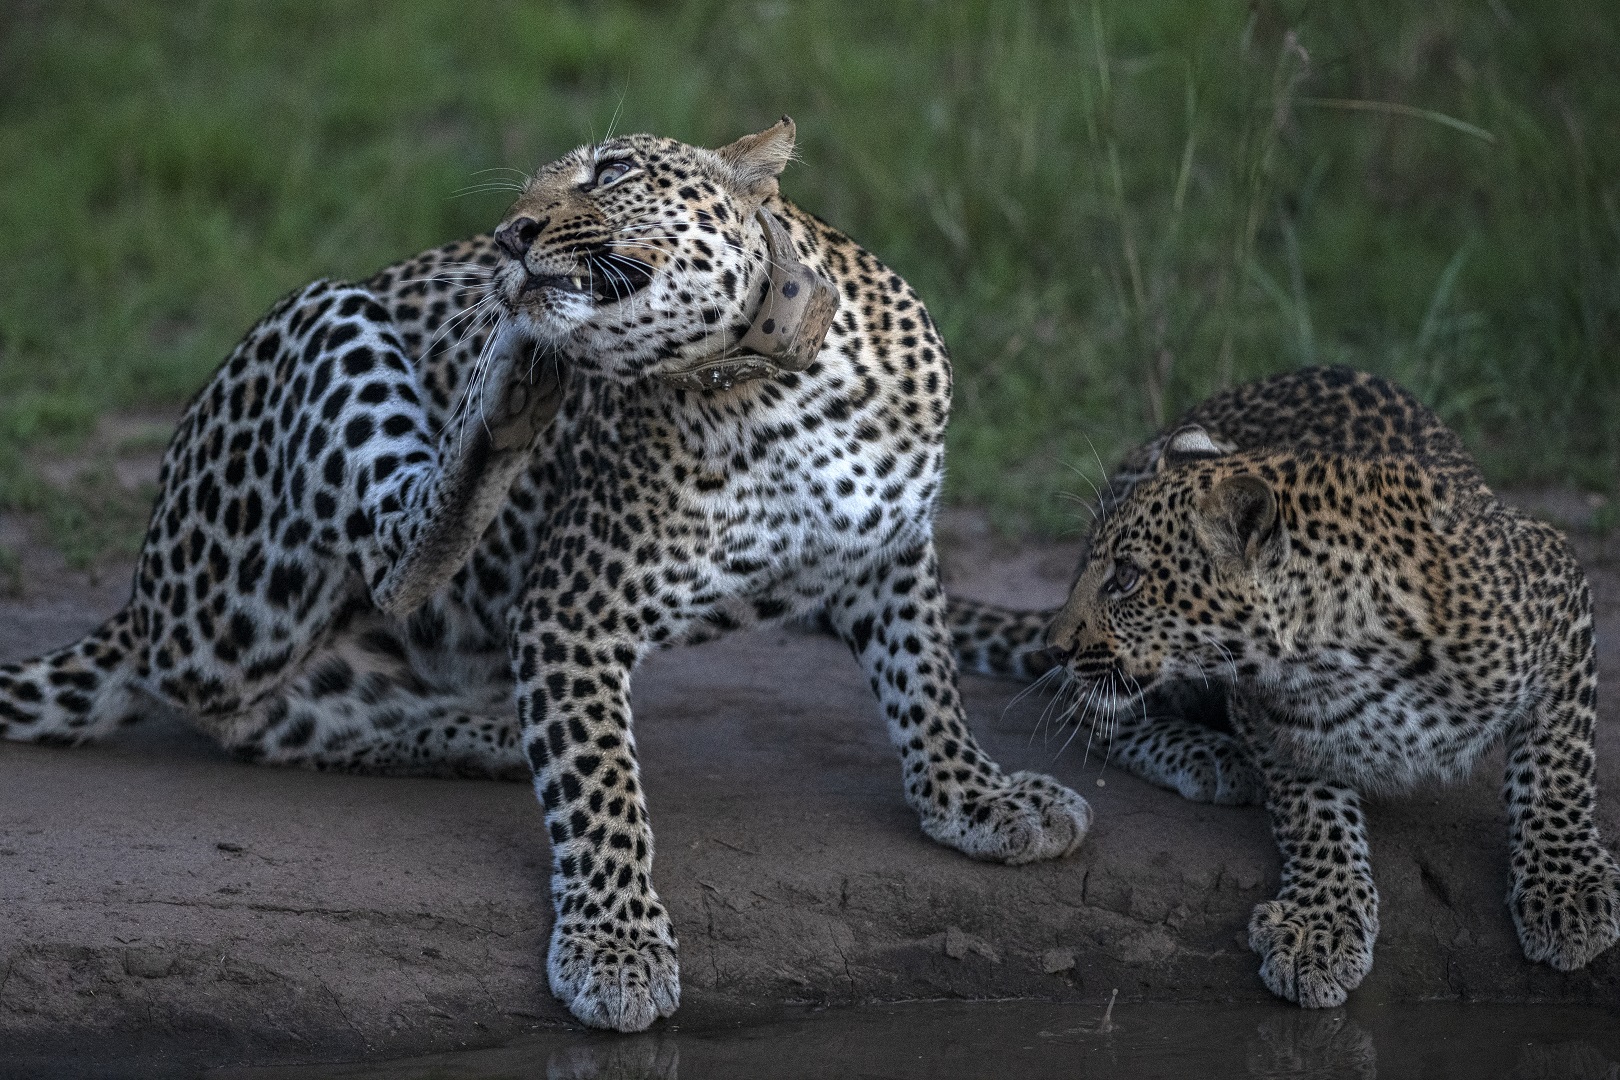 Leopards spotted in Queen Elizabeth National Park